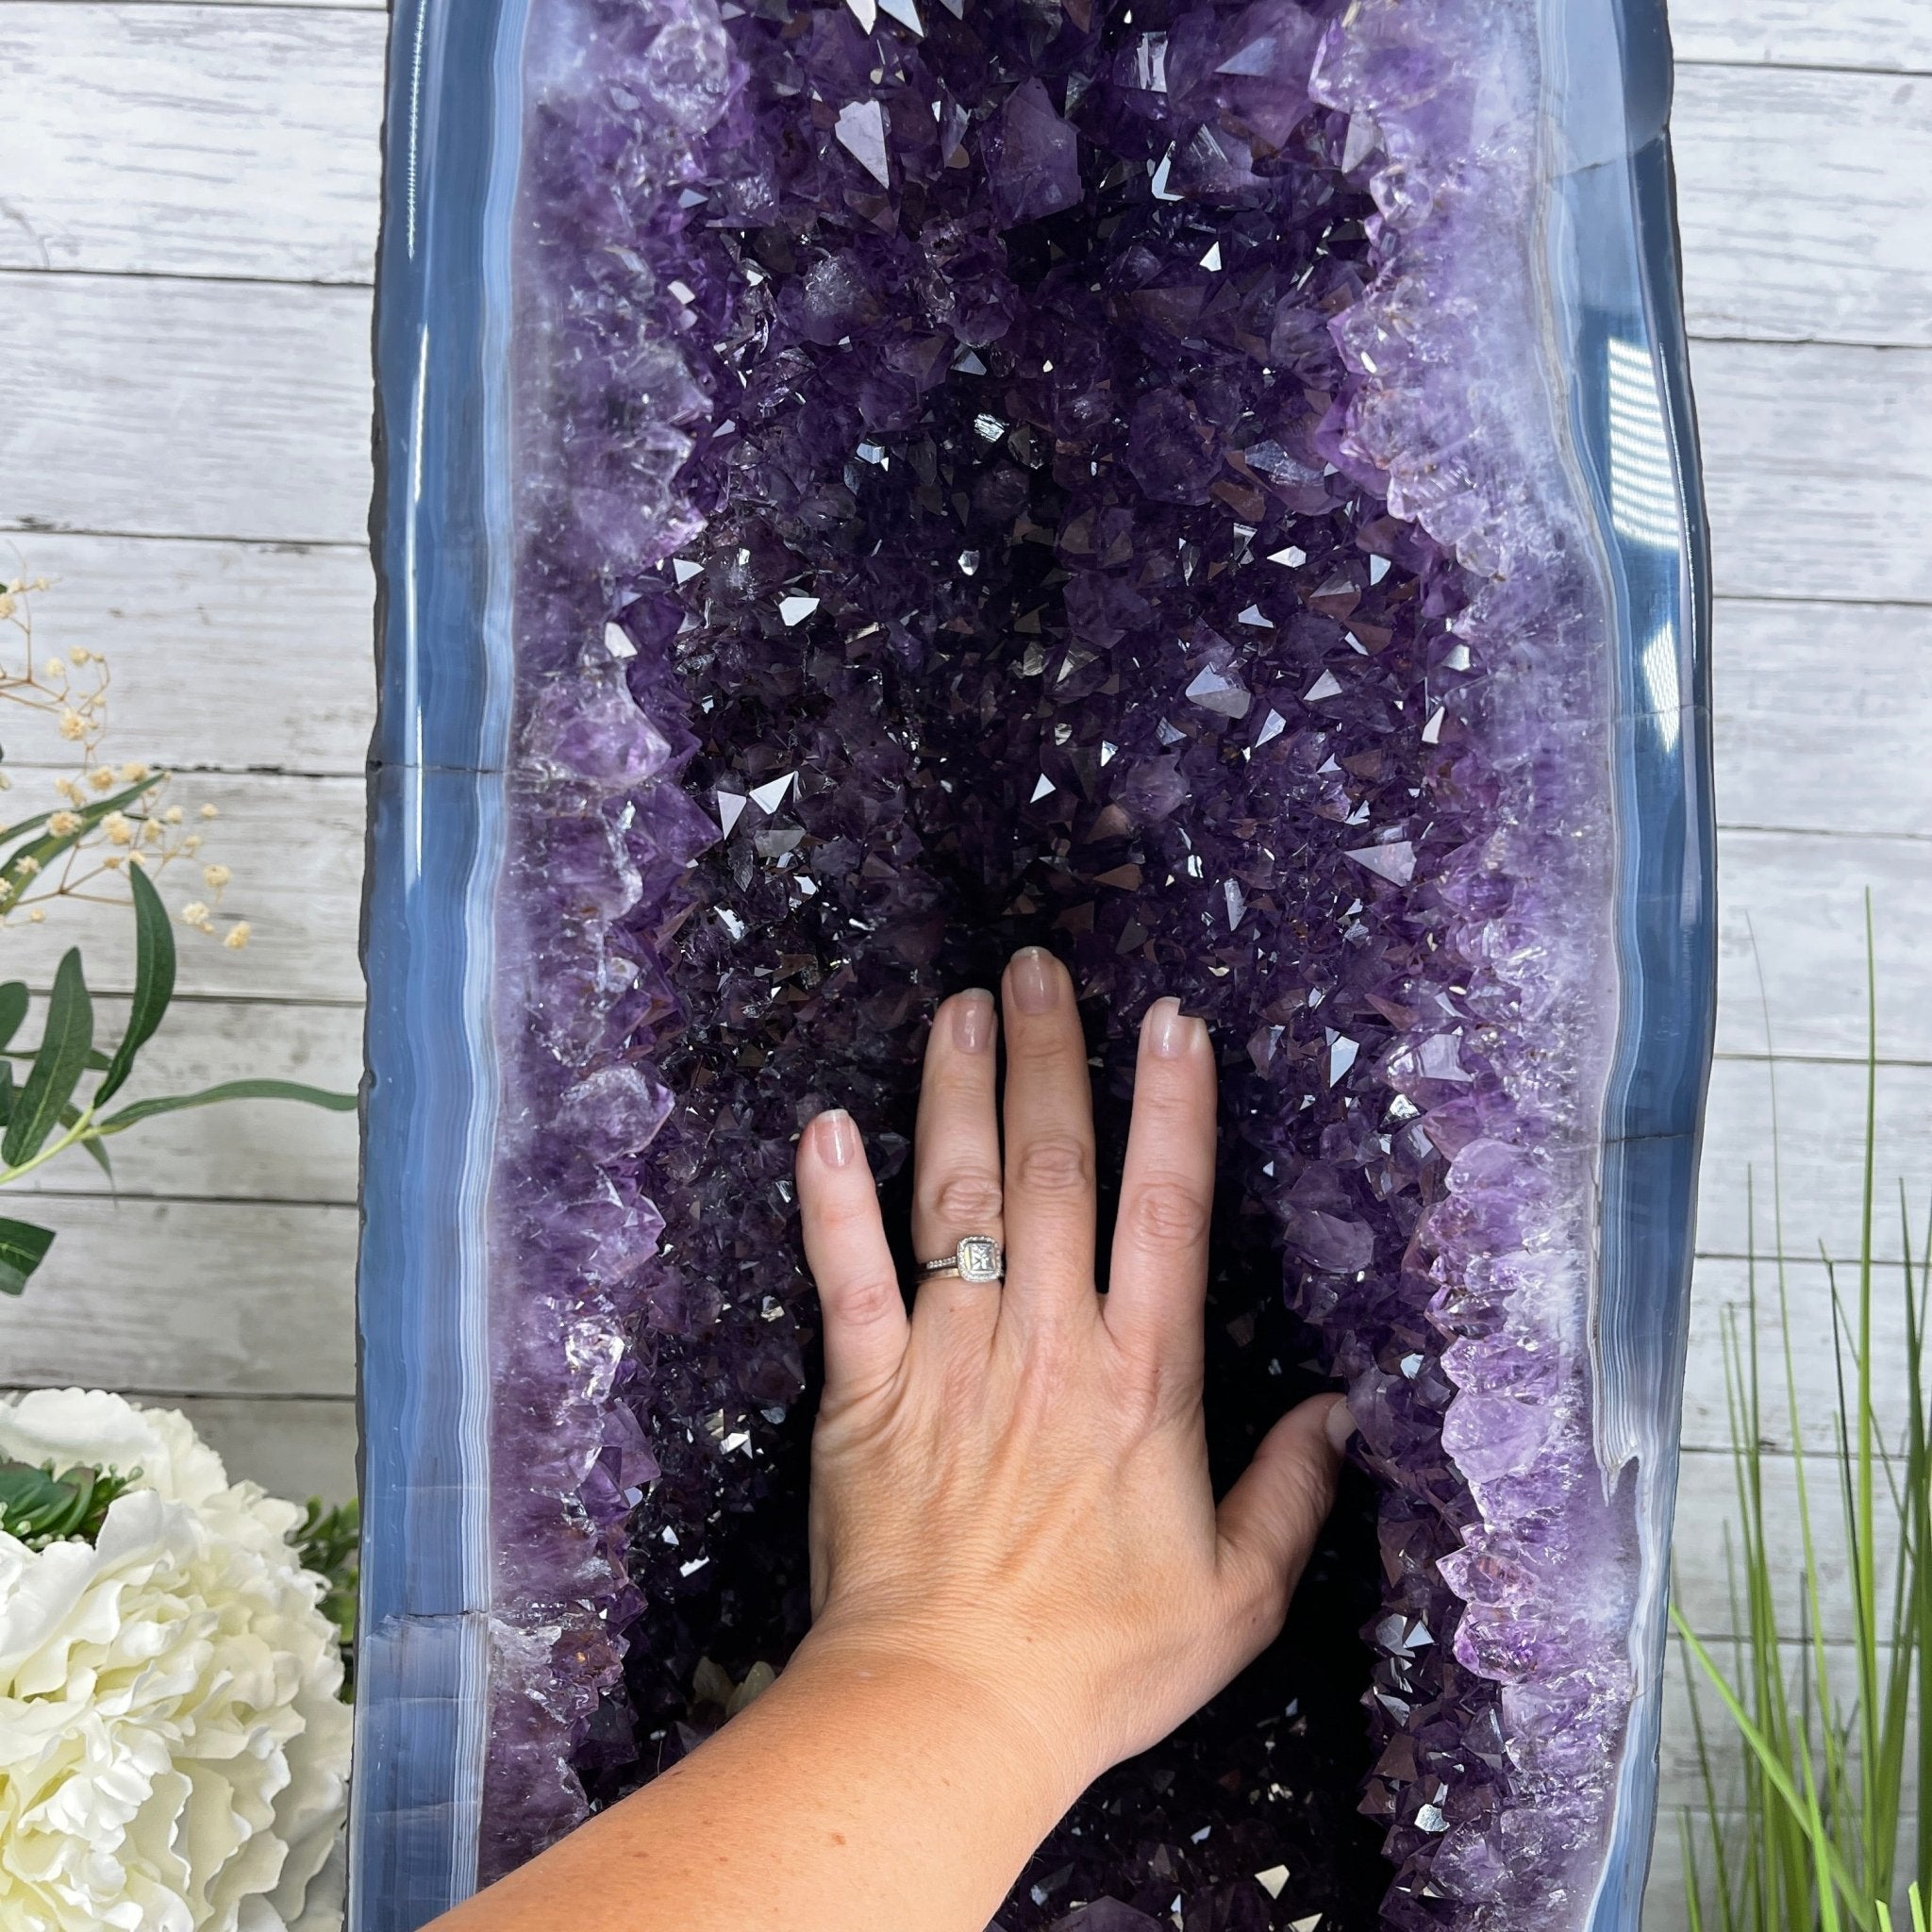 Extra Quality Brazilian Amethyst Cathedral, 22” tall & 79.3 lbs #5601-0540 by Brazil Gems - Brazil GemsBrazil GemsExtra Quality Brazilian Amethyst Cathedral, 22” tall & 79.3 lbs #5601-0540 by Brazil GemsCathedrals5601-0540